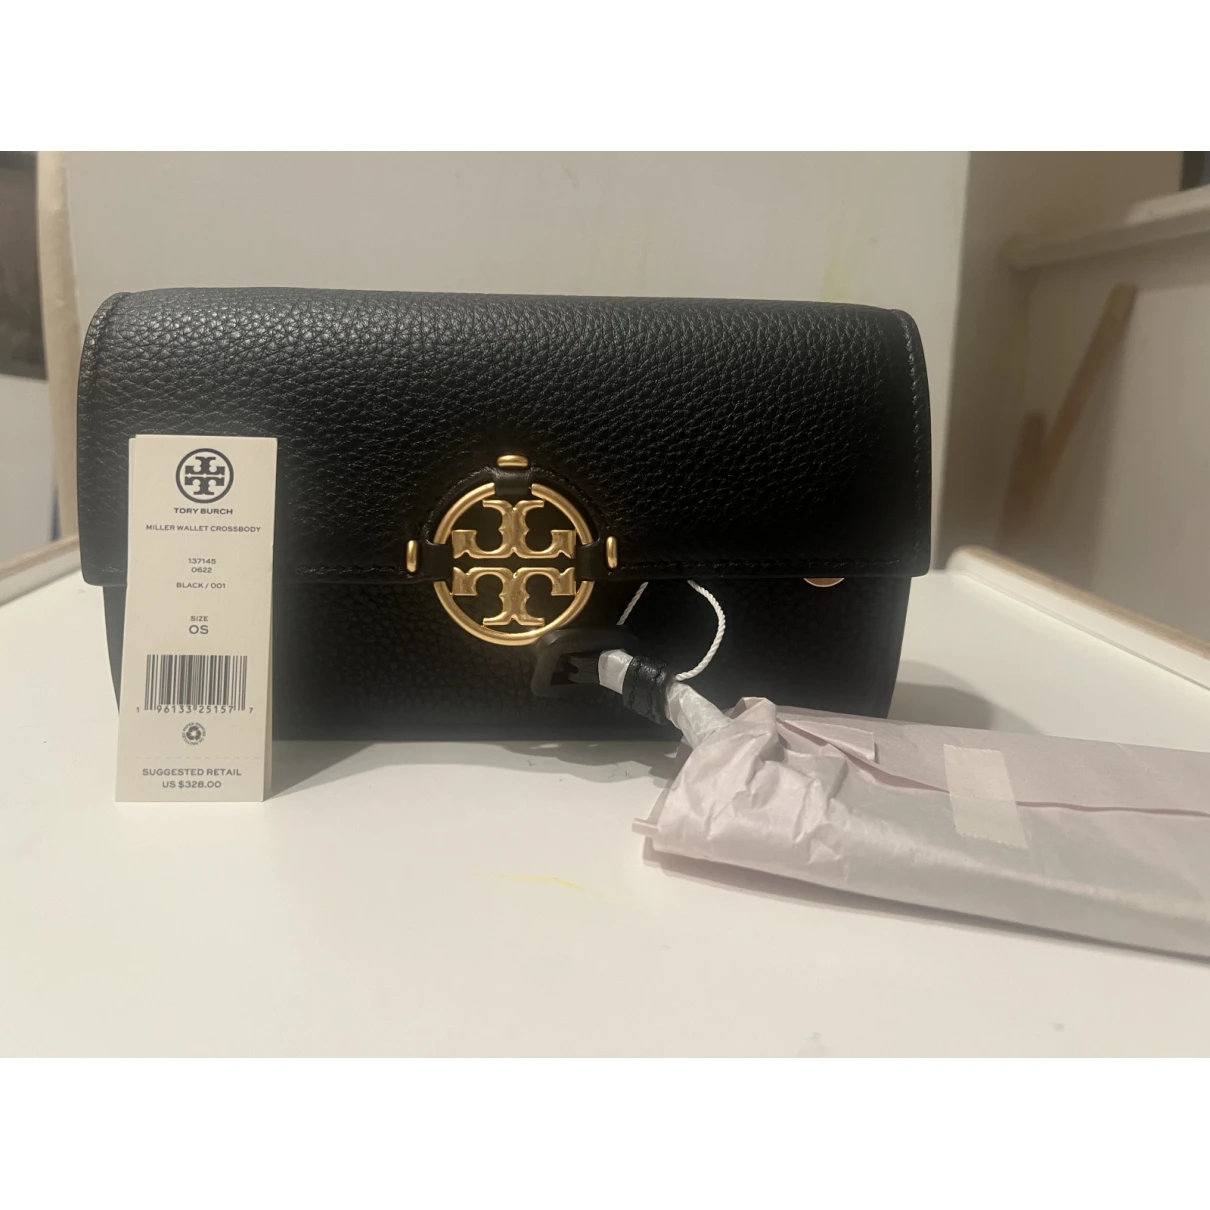 Pre-owned Tory Burch Leather Clutch Bag In Black